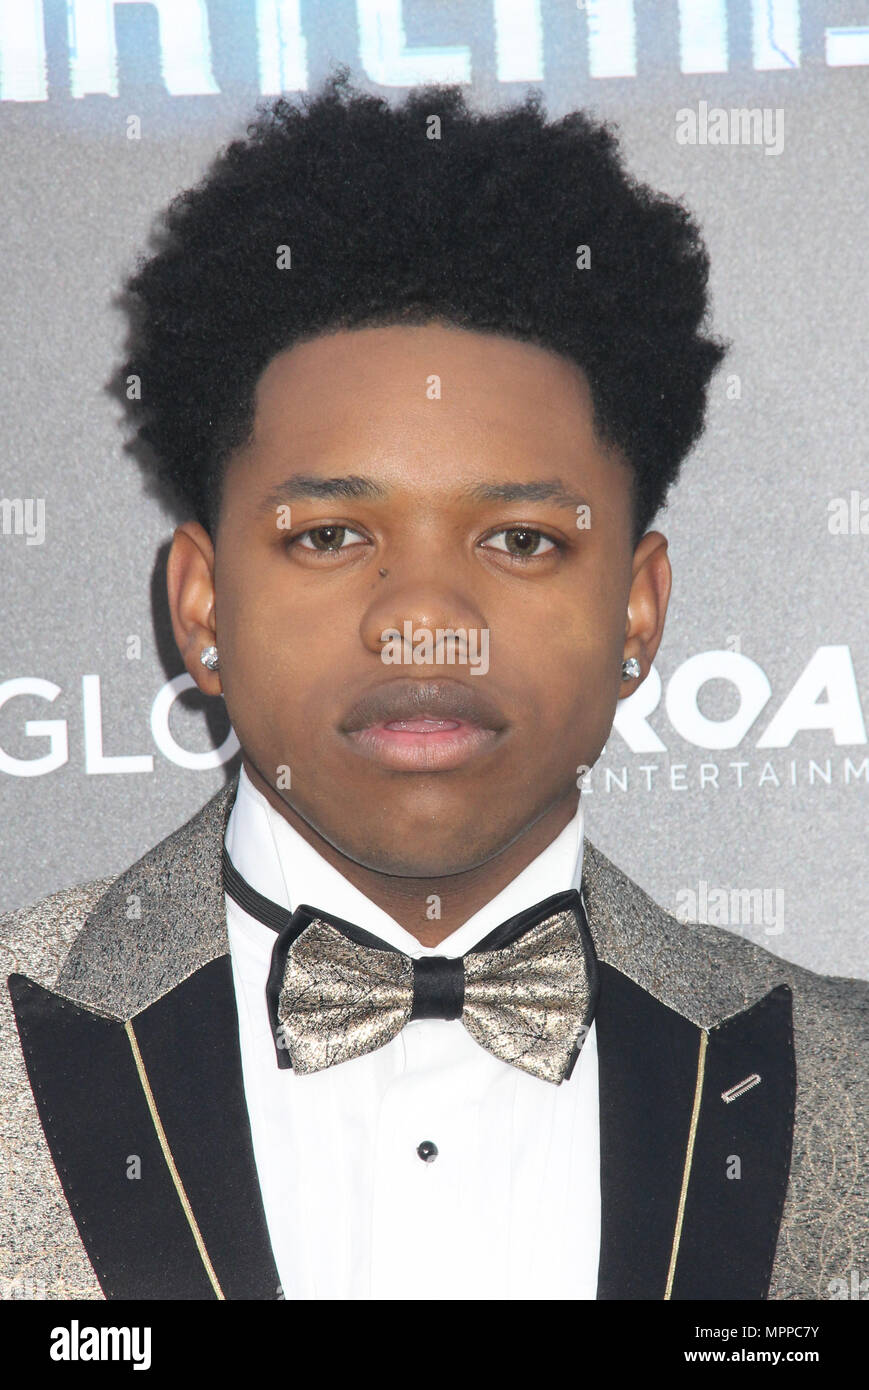 Nathan Davis Jr.  05/19/2018 The Los Angeles premiere of "Hotel Artemis" held at the Regency Bruin Theatre in Los Angeles, CA   Photo: Cronos/Hollywood News Stock Photo